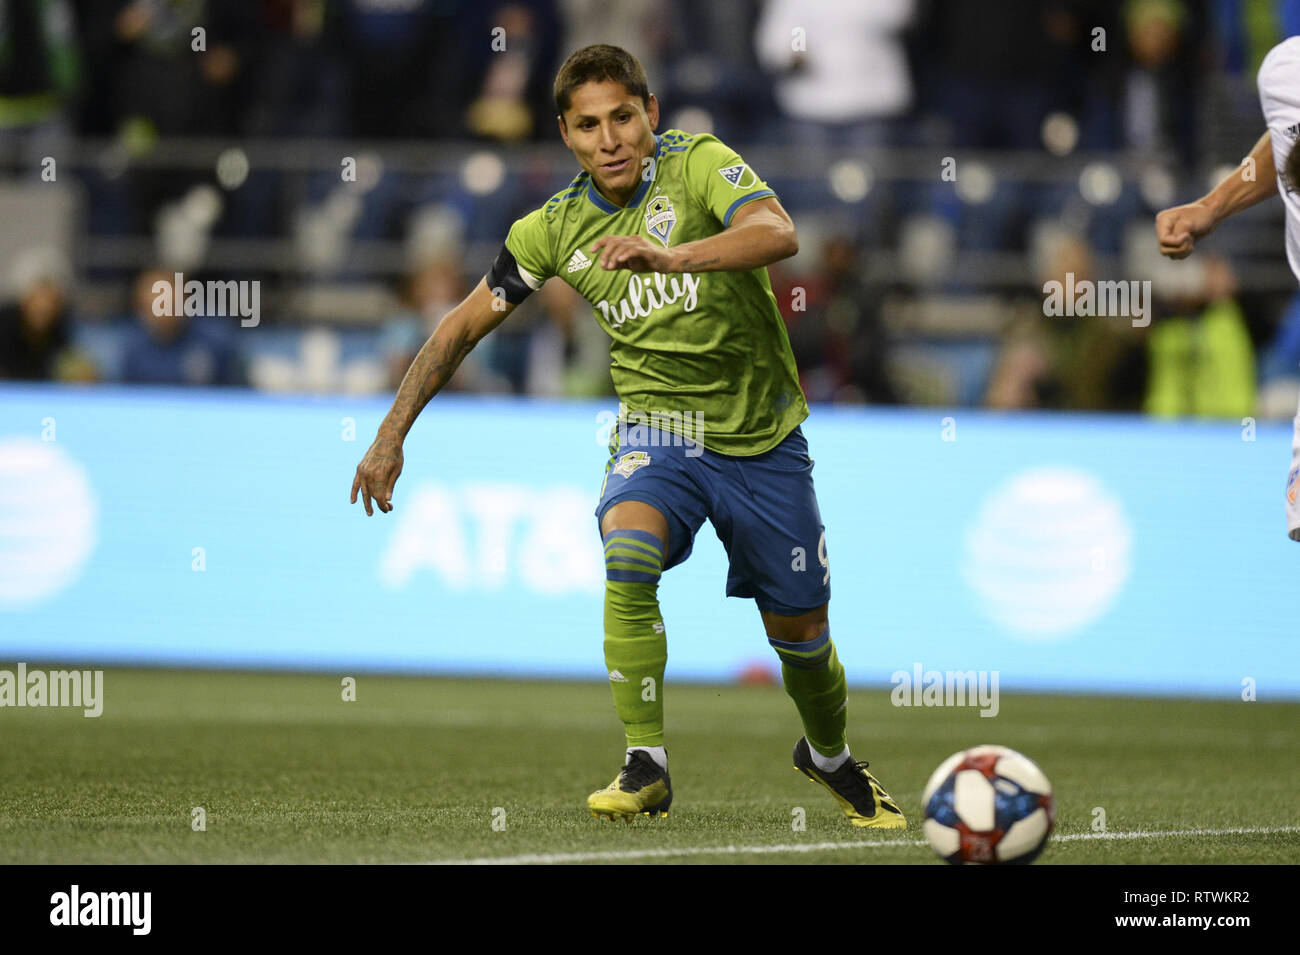 Seattle, Washington, USA. 2nd Mar, 2019. The Sounders Raul Ruidiaz (9) in action as FC Cincinnati visits the Seattle Sounders in a MLS match at Century Link Field in Seattle, WA. Credit: Jeff Halstead/ZUMA Wire/Alamy Live News Stock Photo